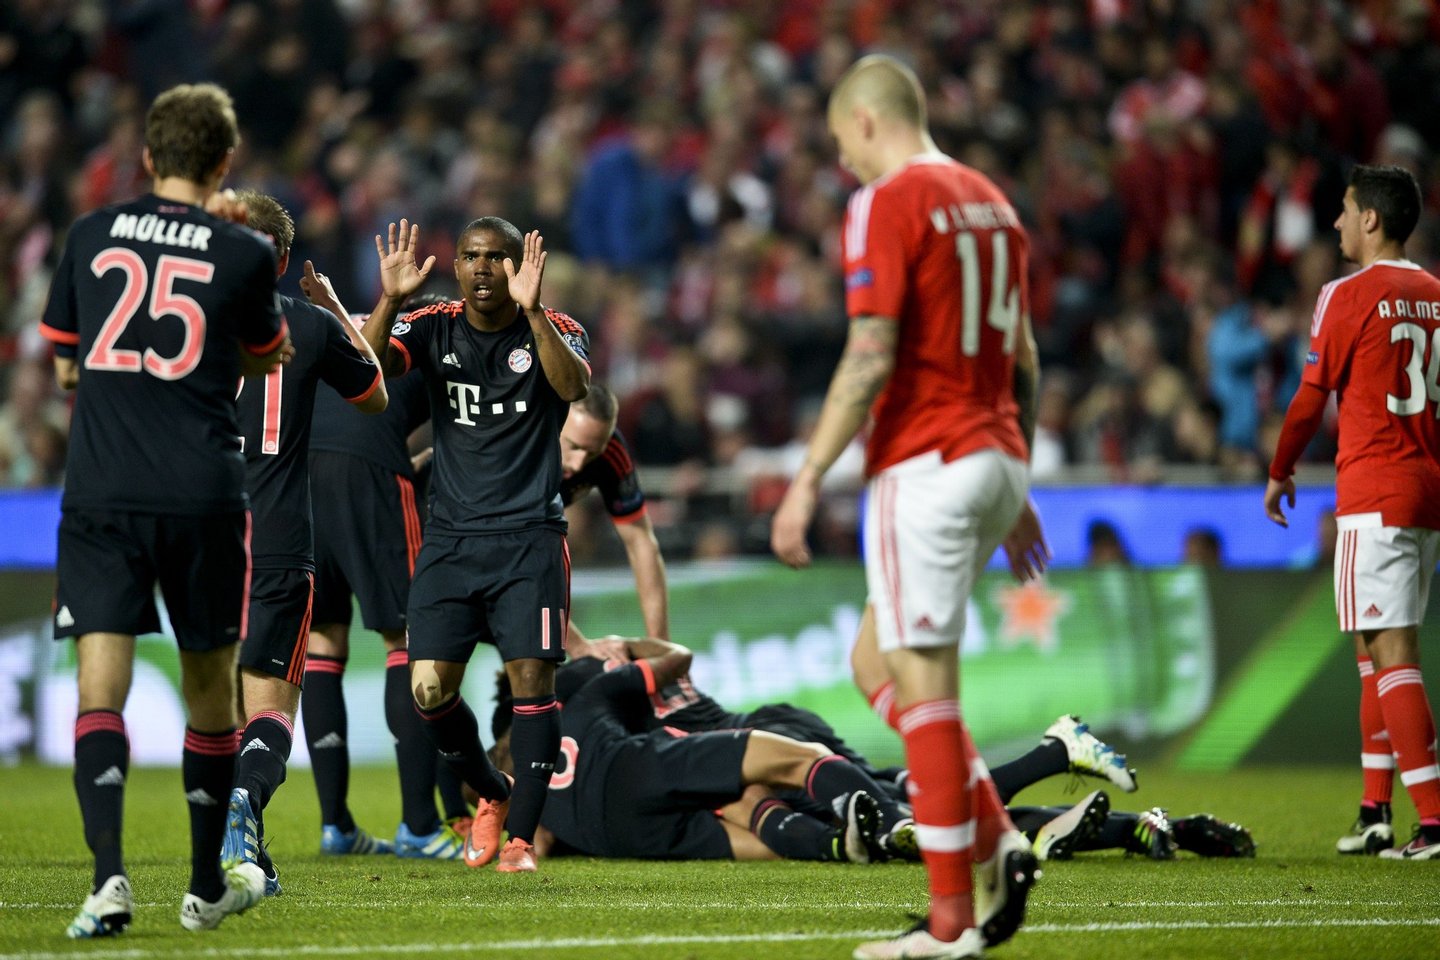 Bayern Munich's Brazilian midfielder Douglas Costa (3L) celebrates with his teammates after scoring during the Champions League quarter-final second leg football match SL Benfica vs Bayern Munchen at the Luz stadium in Lisbon on April 13, 2016. / AFP / PATRICIA DE MELO MOREIRA (Photo credit should read PATRICIA DE MELO MOREIRA/AFP/Getty Images)